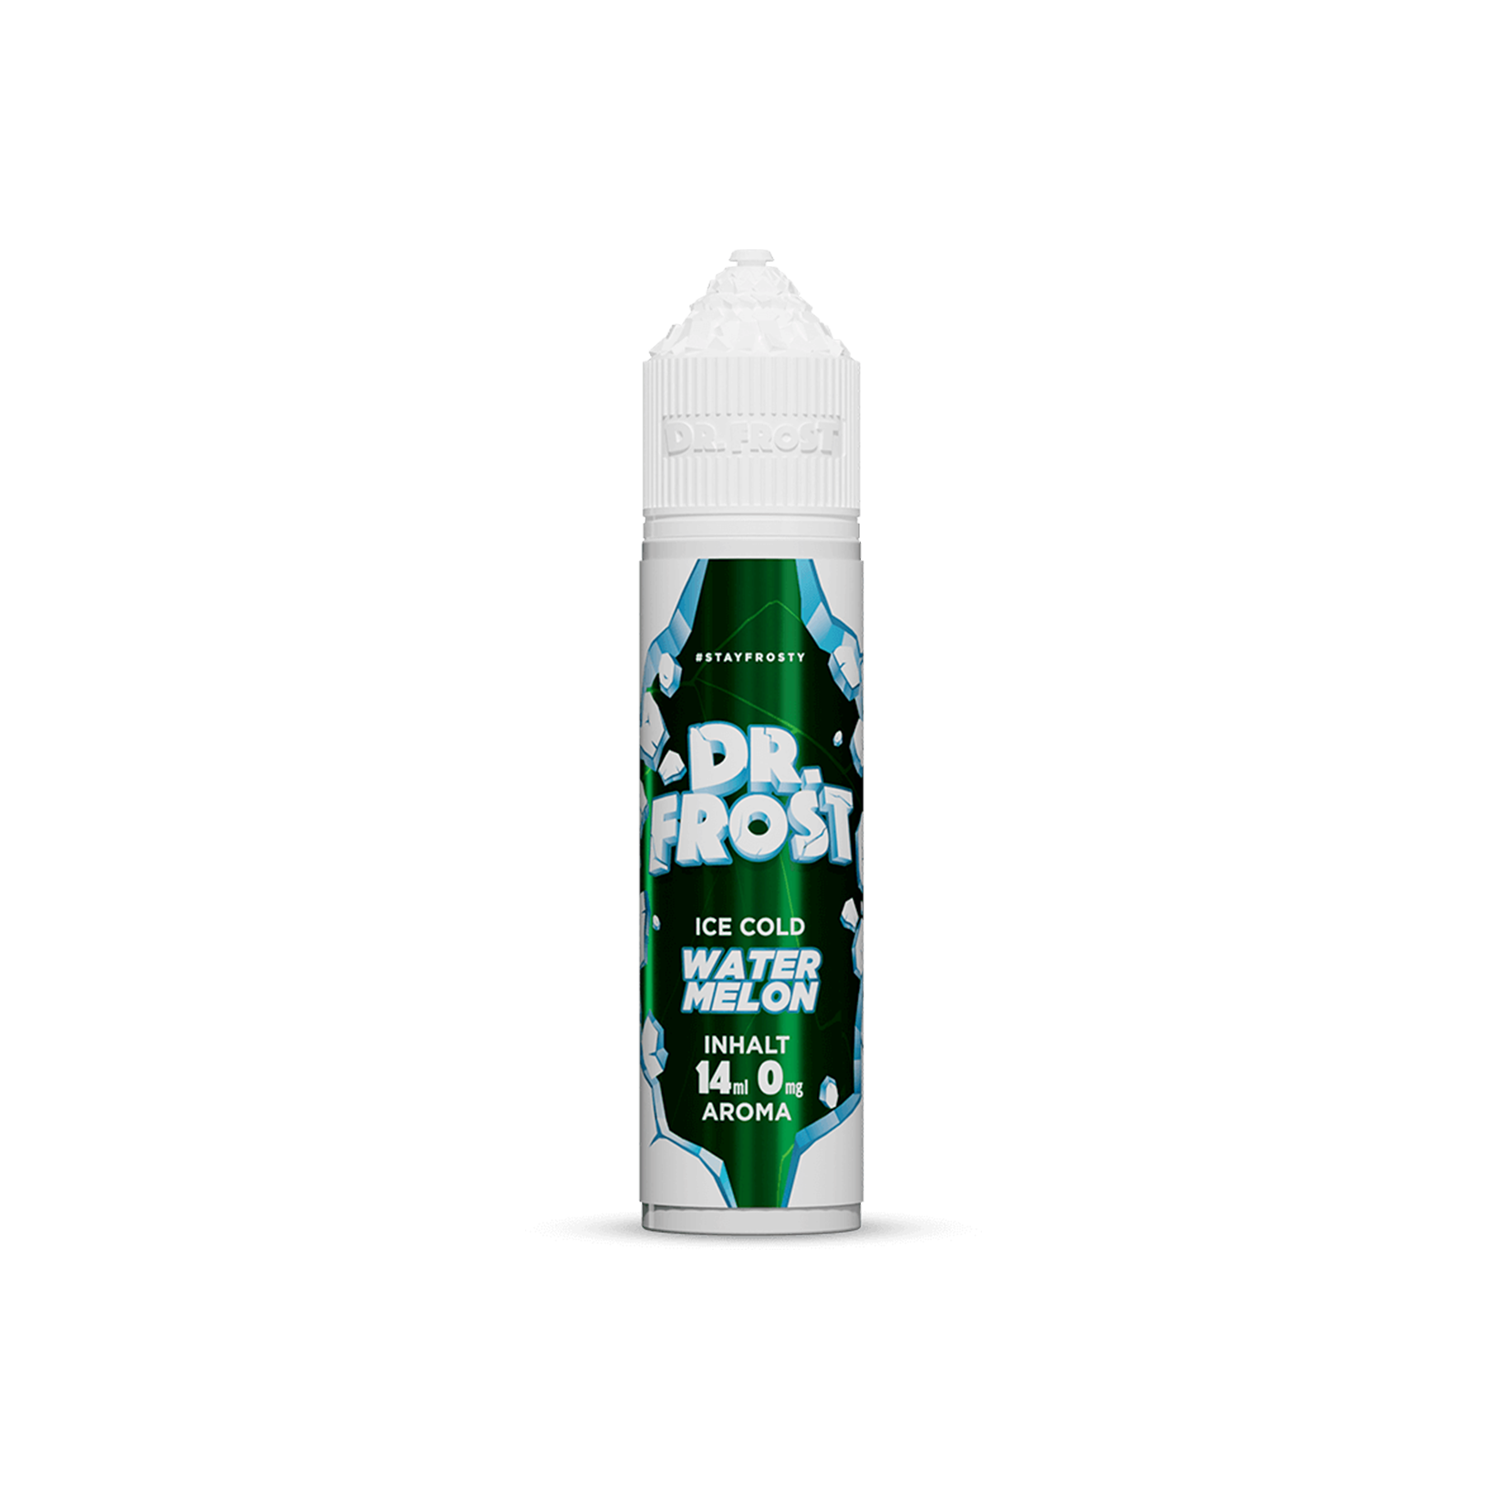 Dr. Frost - Ice Cold - Watermelon 14 ml Aroma